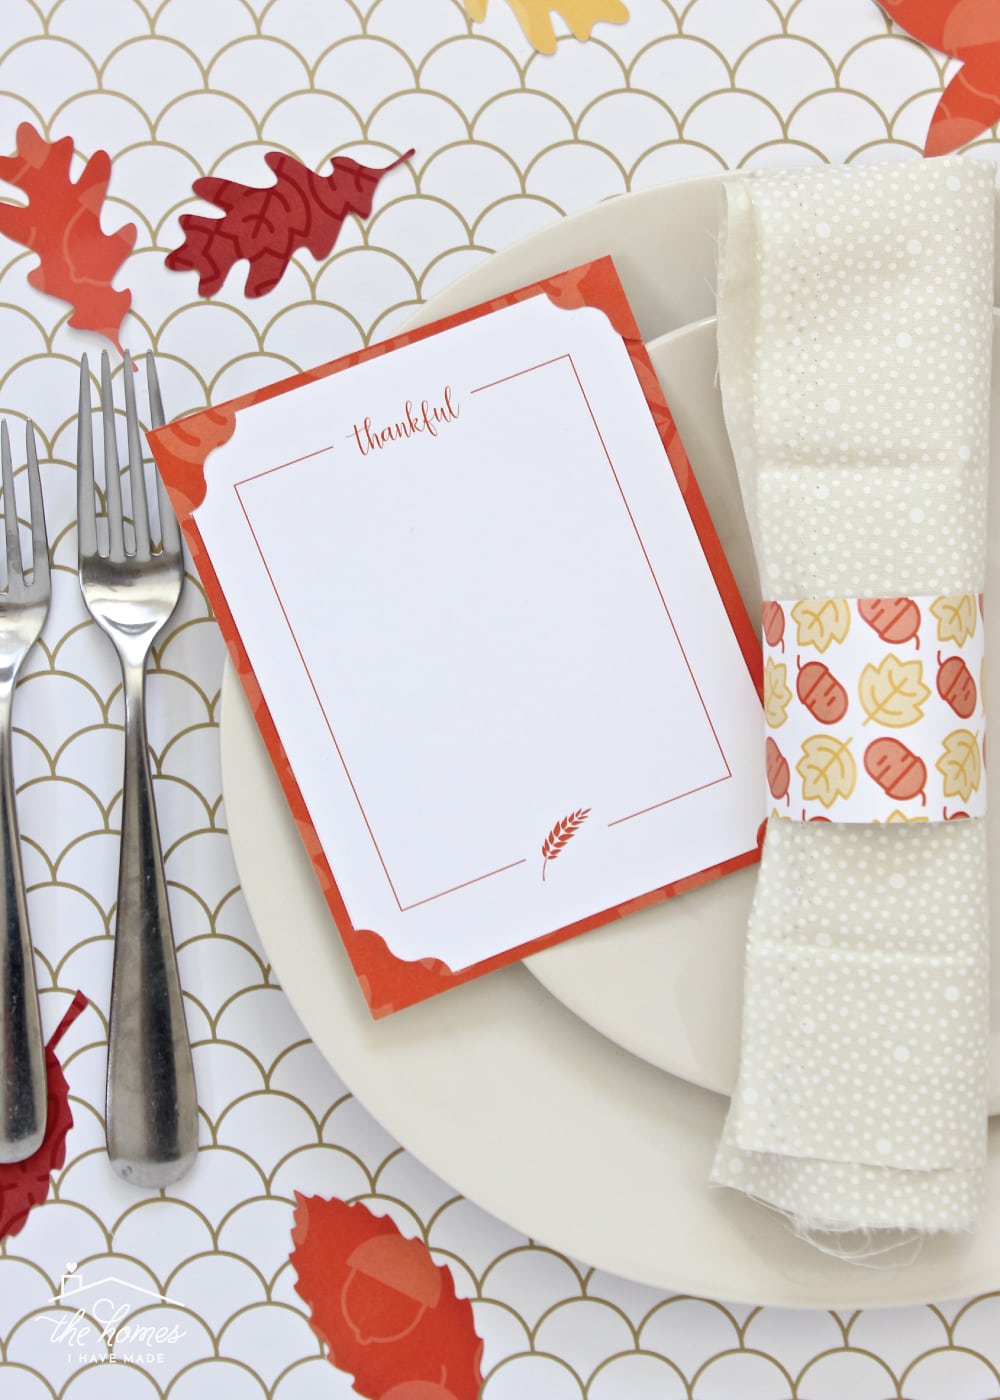 Orange printed Thankful Card for Thanksgiving Table